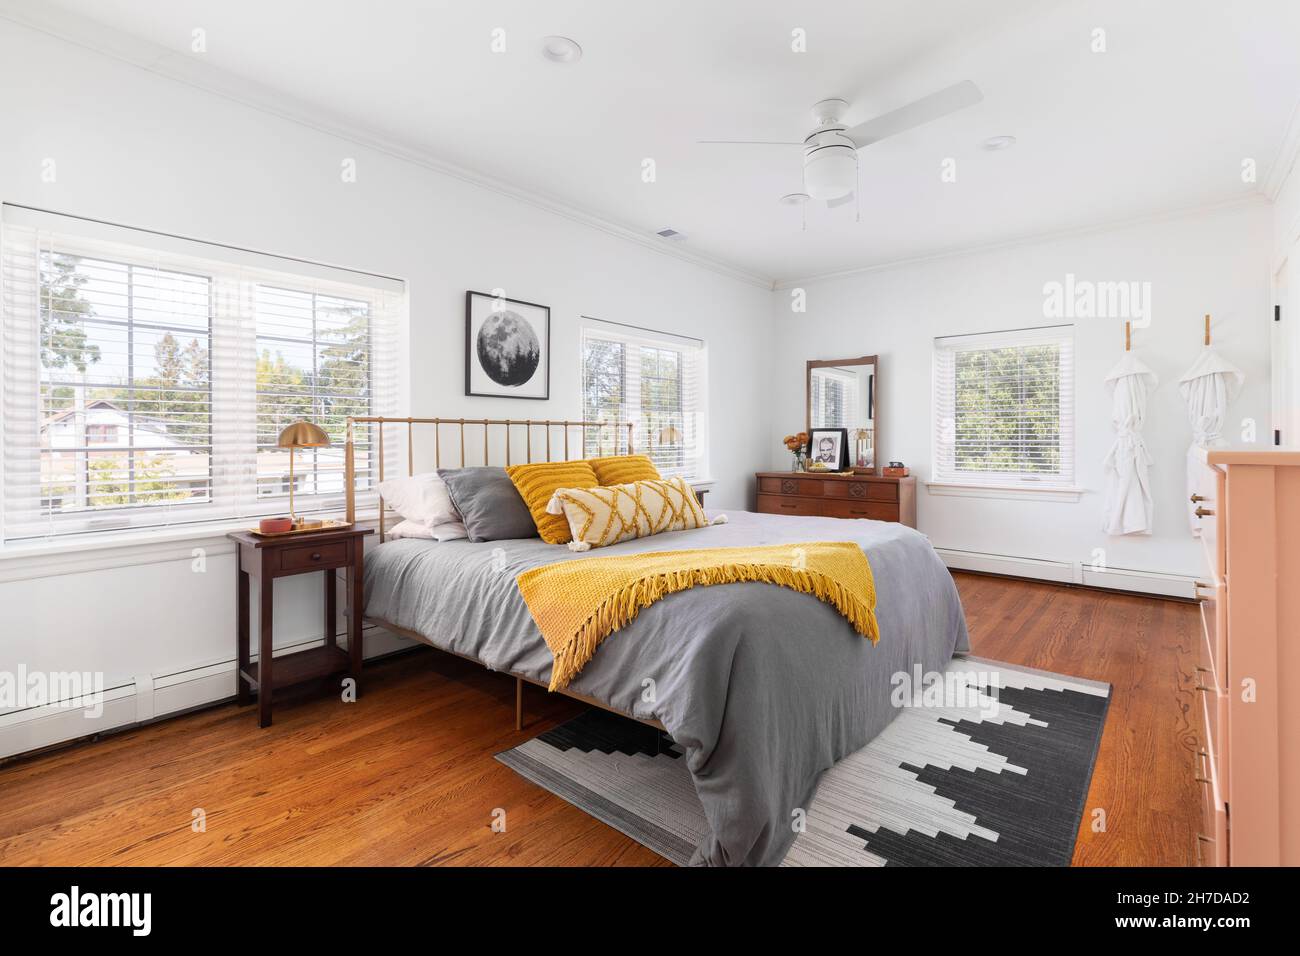 A bright bedroom with white walls, yellow and grey bedding, and a rug on hardwood floors. Stock Photo